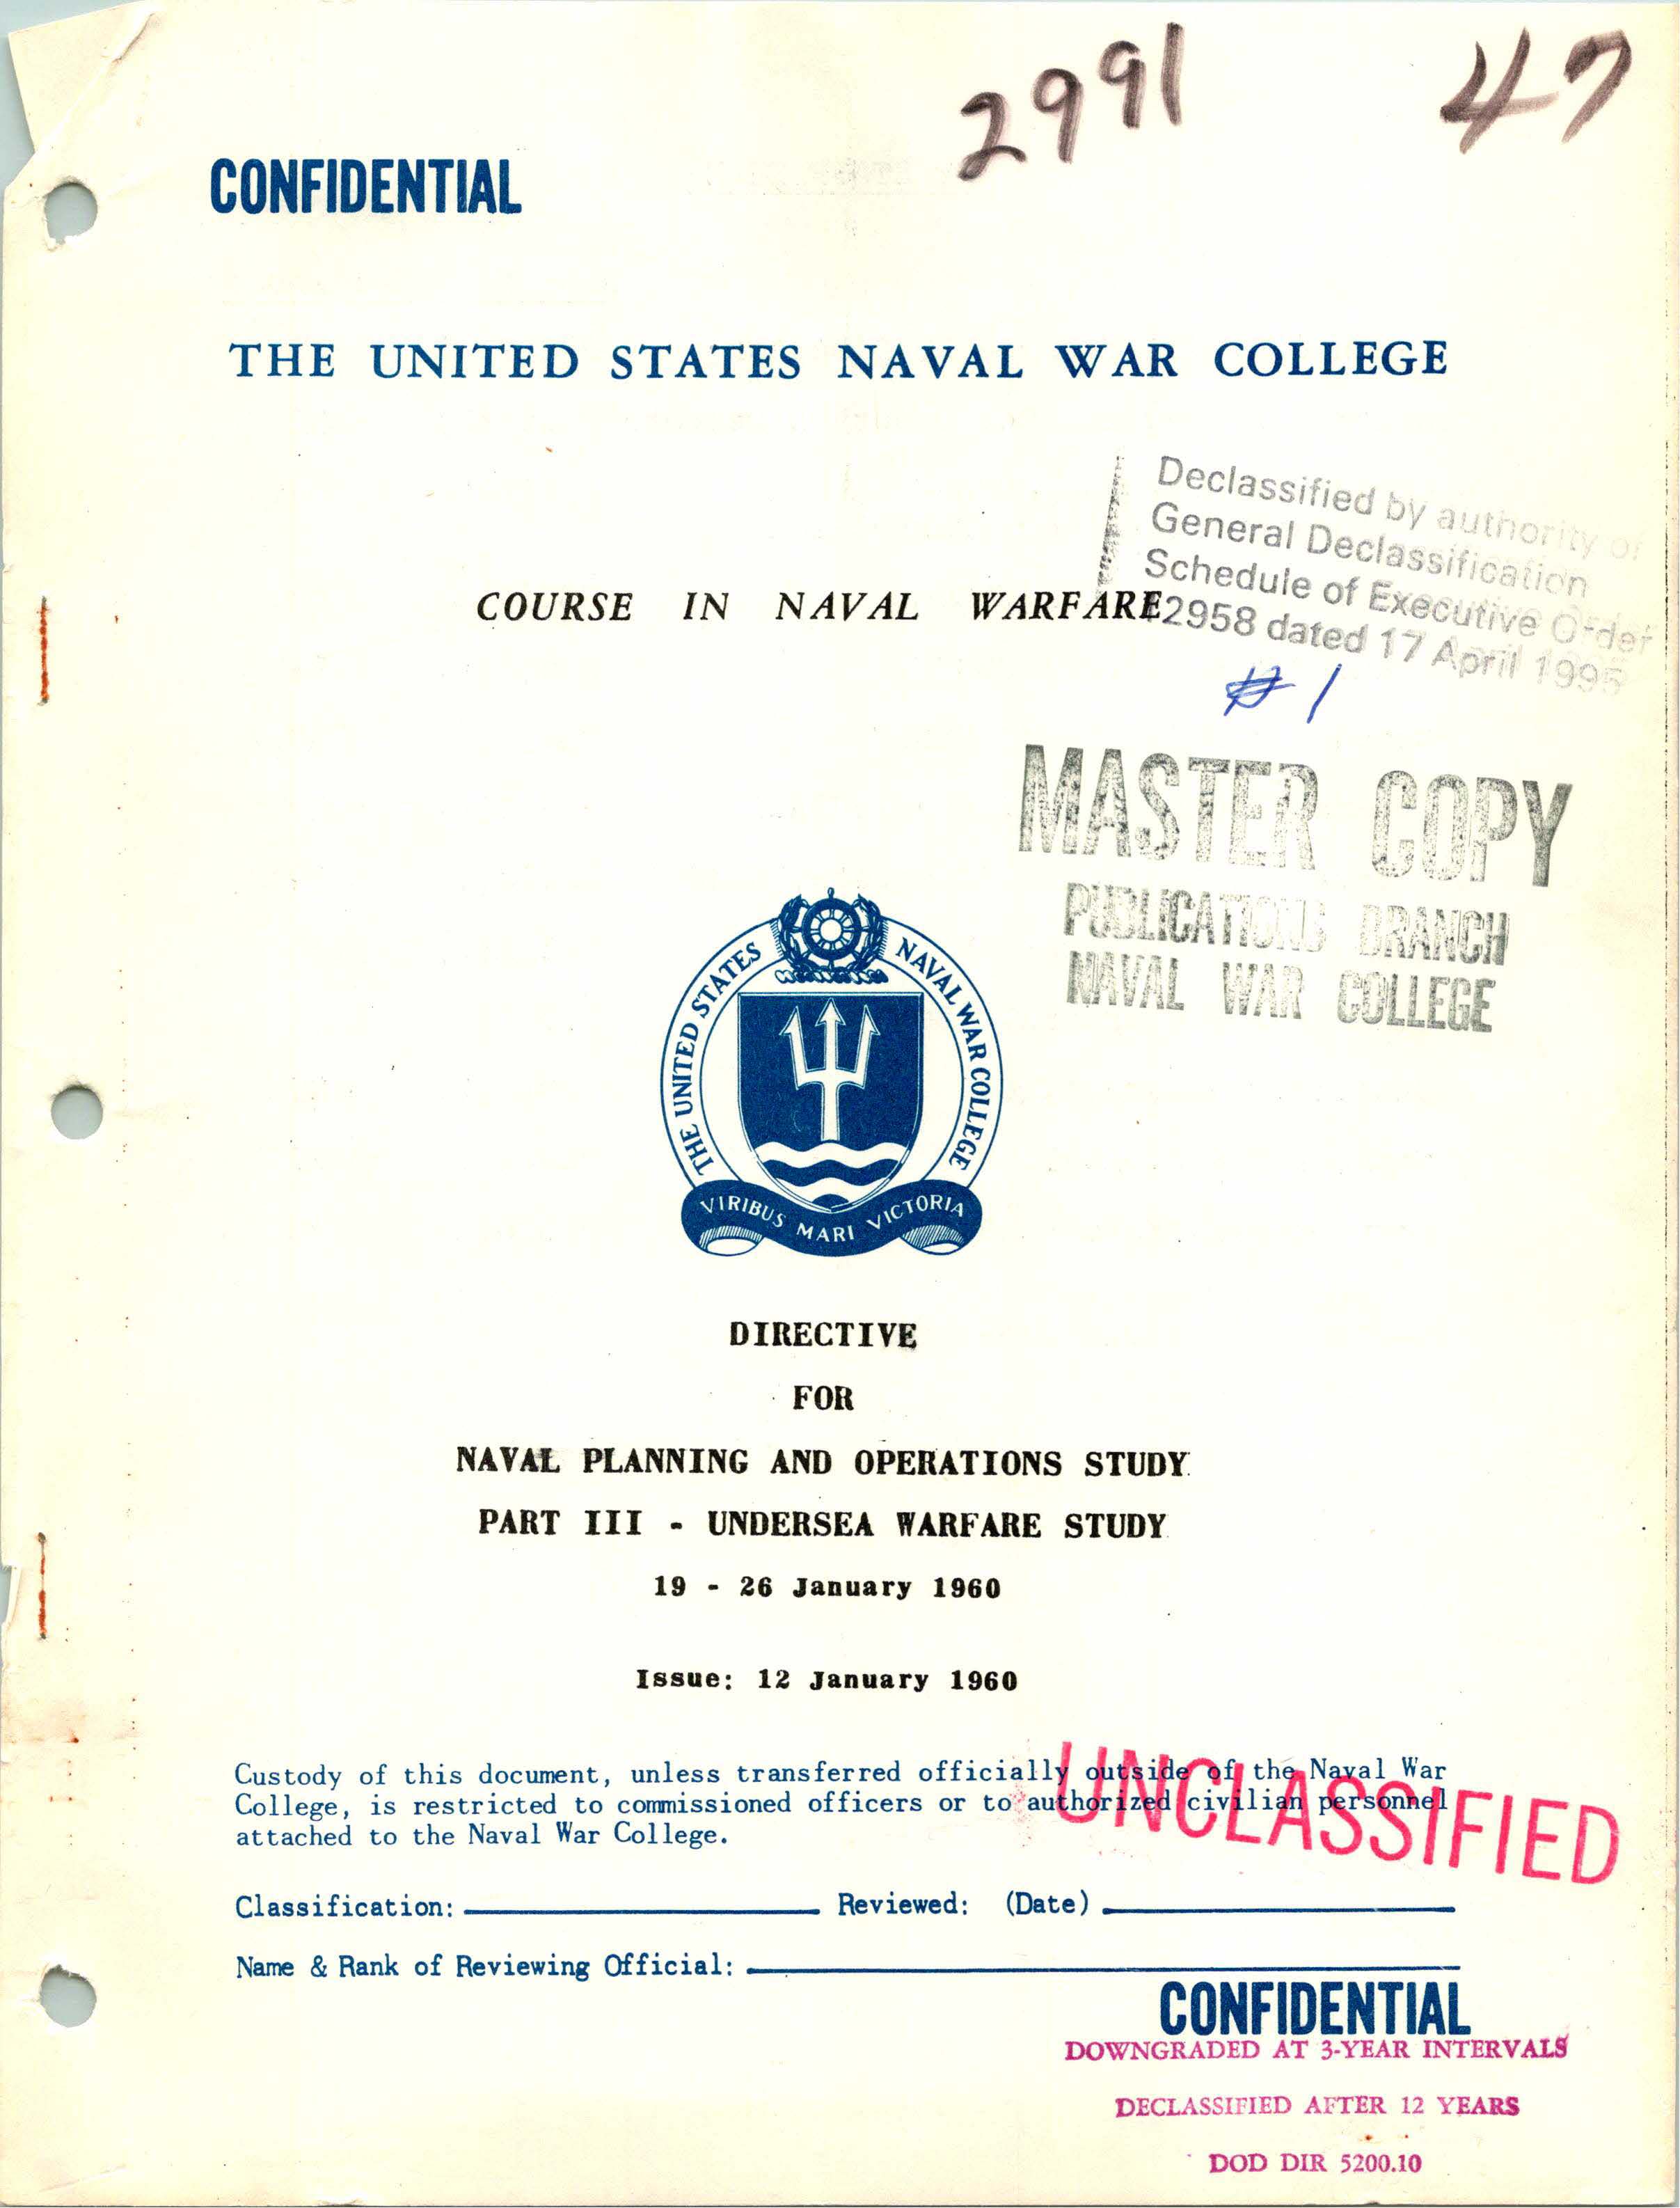 Directive for Naval Planning and Operations Study, Part 3: Undersea Warfare Study, Course in Naval Warfare